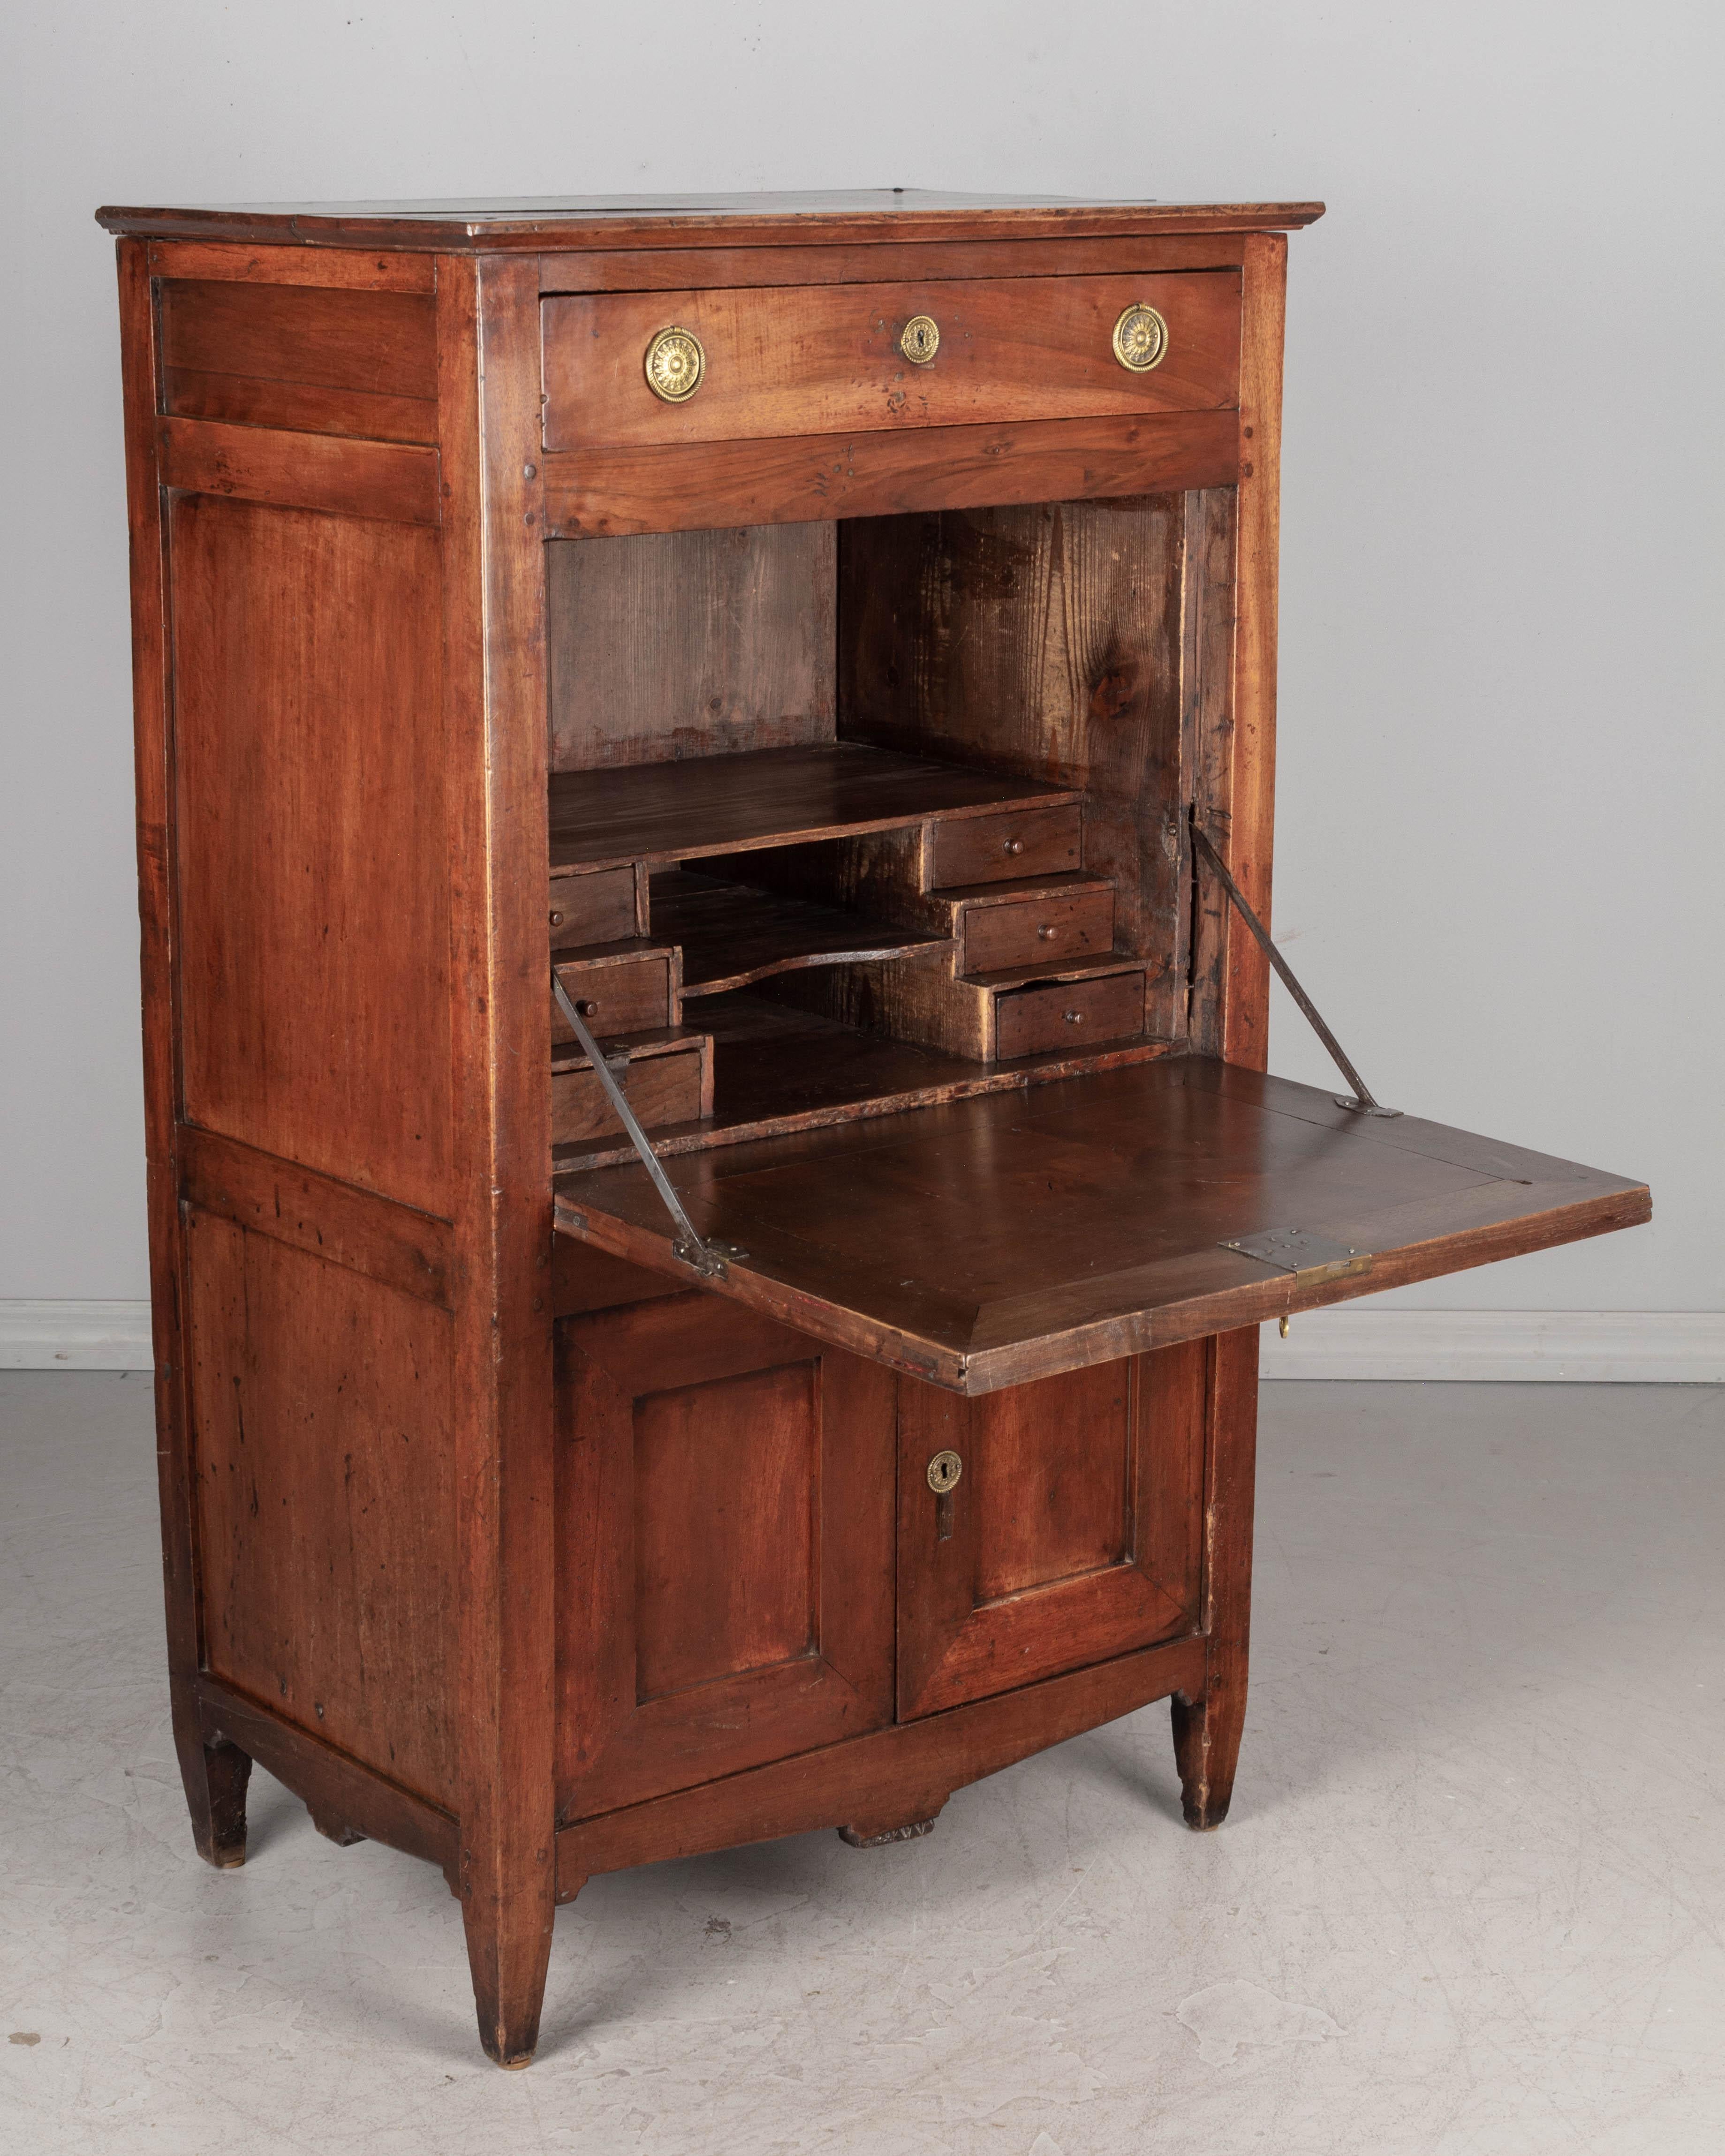 A late 18th century Country French Directoire Period secretaire à abbattant. This drop leaf desk is made of solid walnut, and opens to a pine interior with six small dovetailed drawers. The cabinet below has one interior shelf. One dovetailed drawer